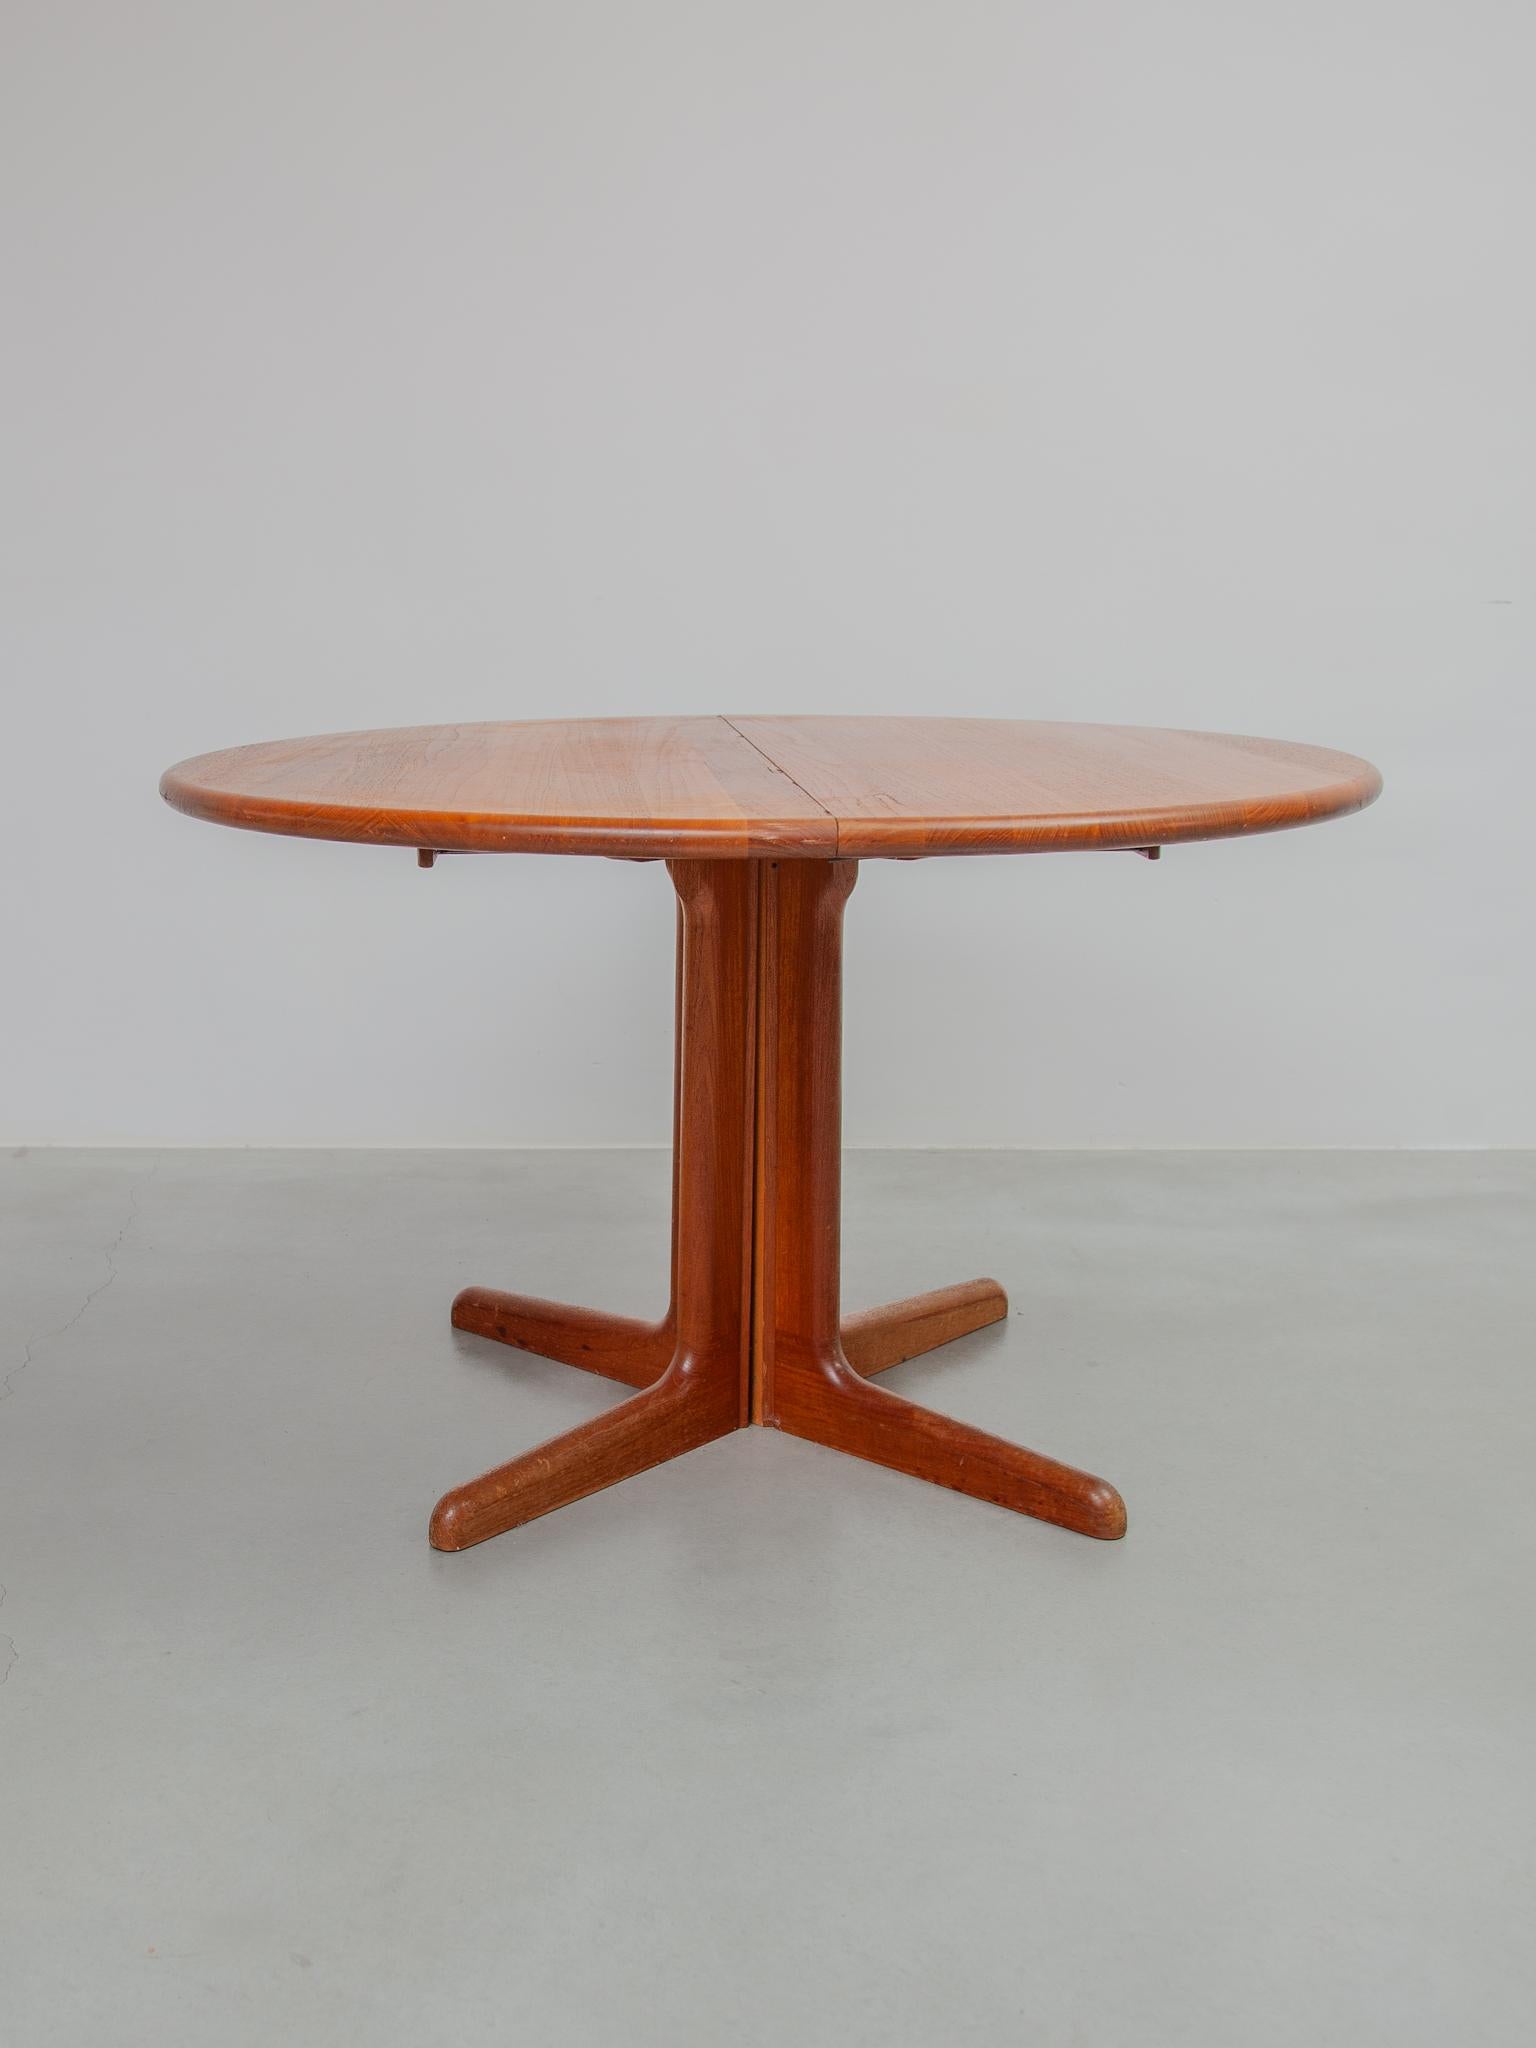 Beautiful original round dining table extendable in two positions Oval dining table designed by Manufacture Gudme Møbelfabrik, 1970s. Superb quality in good condition with beautiful deep color and grain teak with some signs of use. The table has two